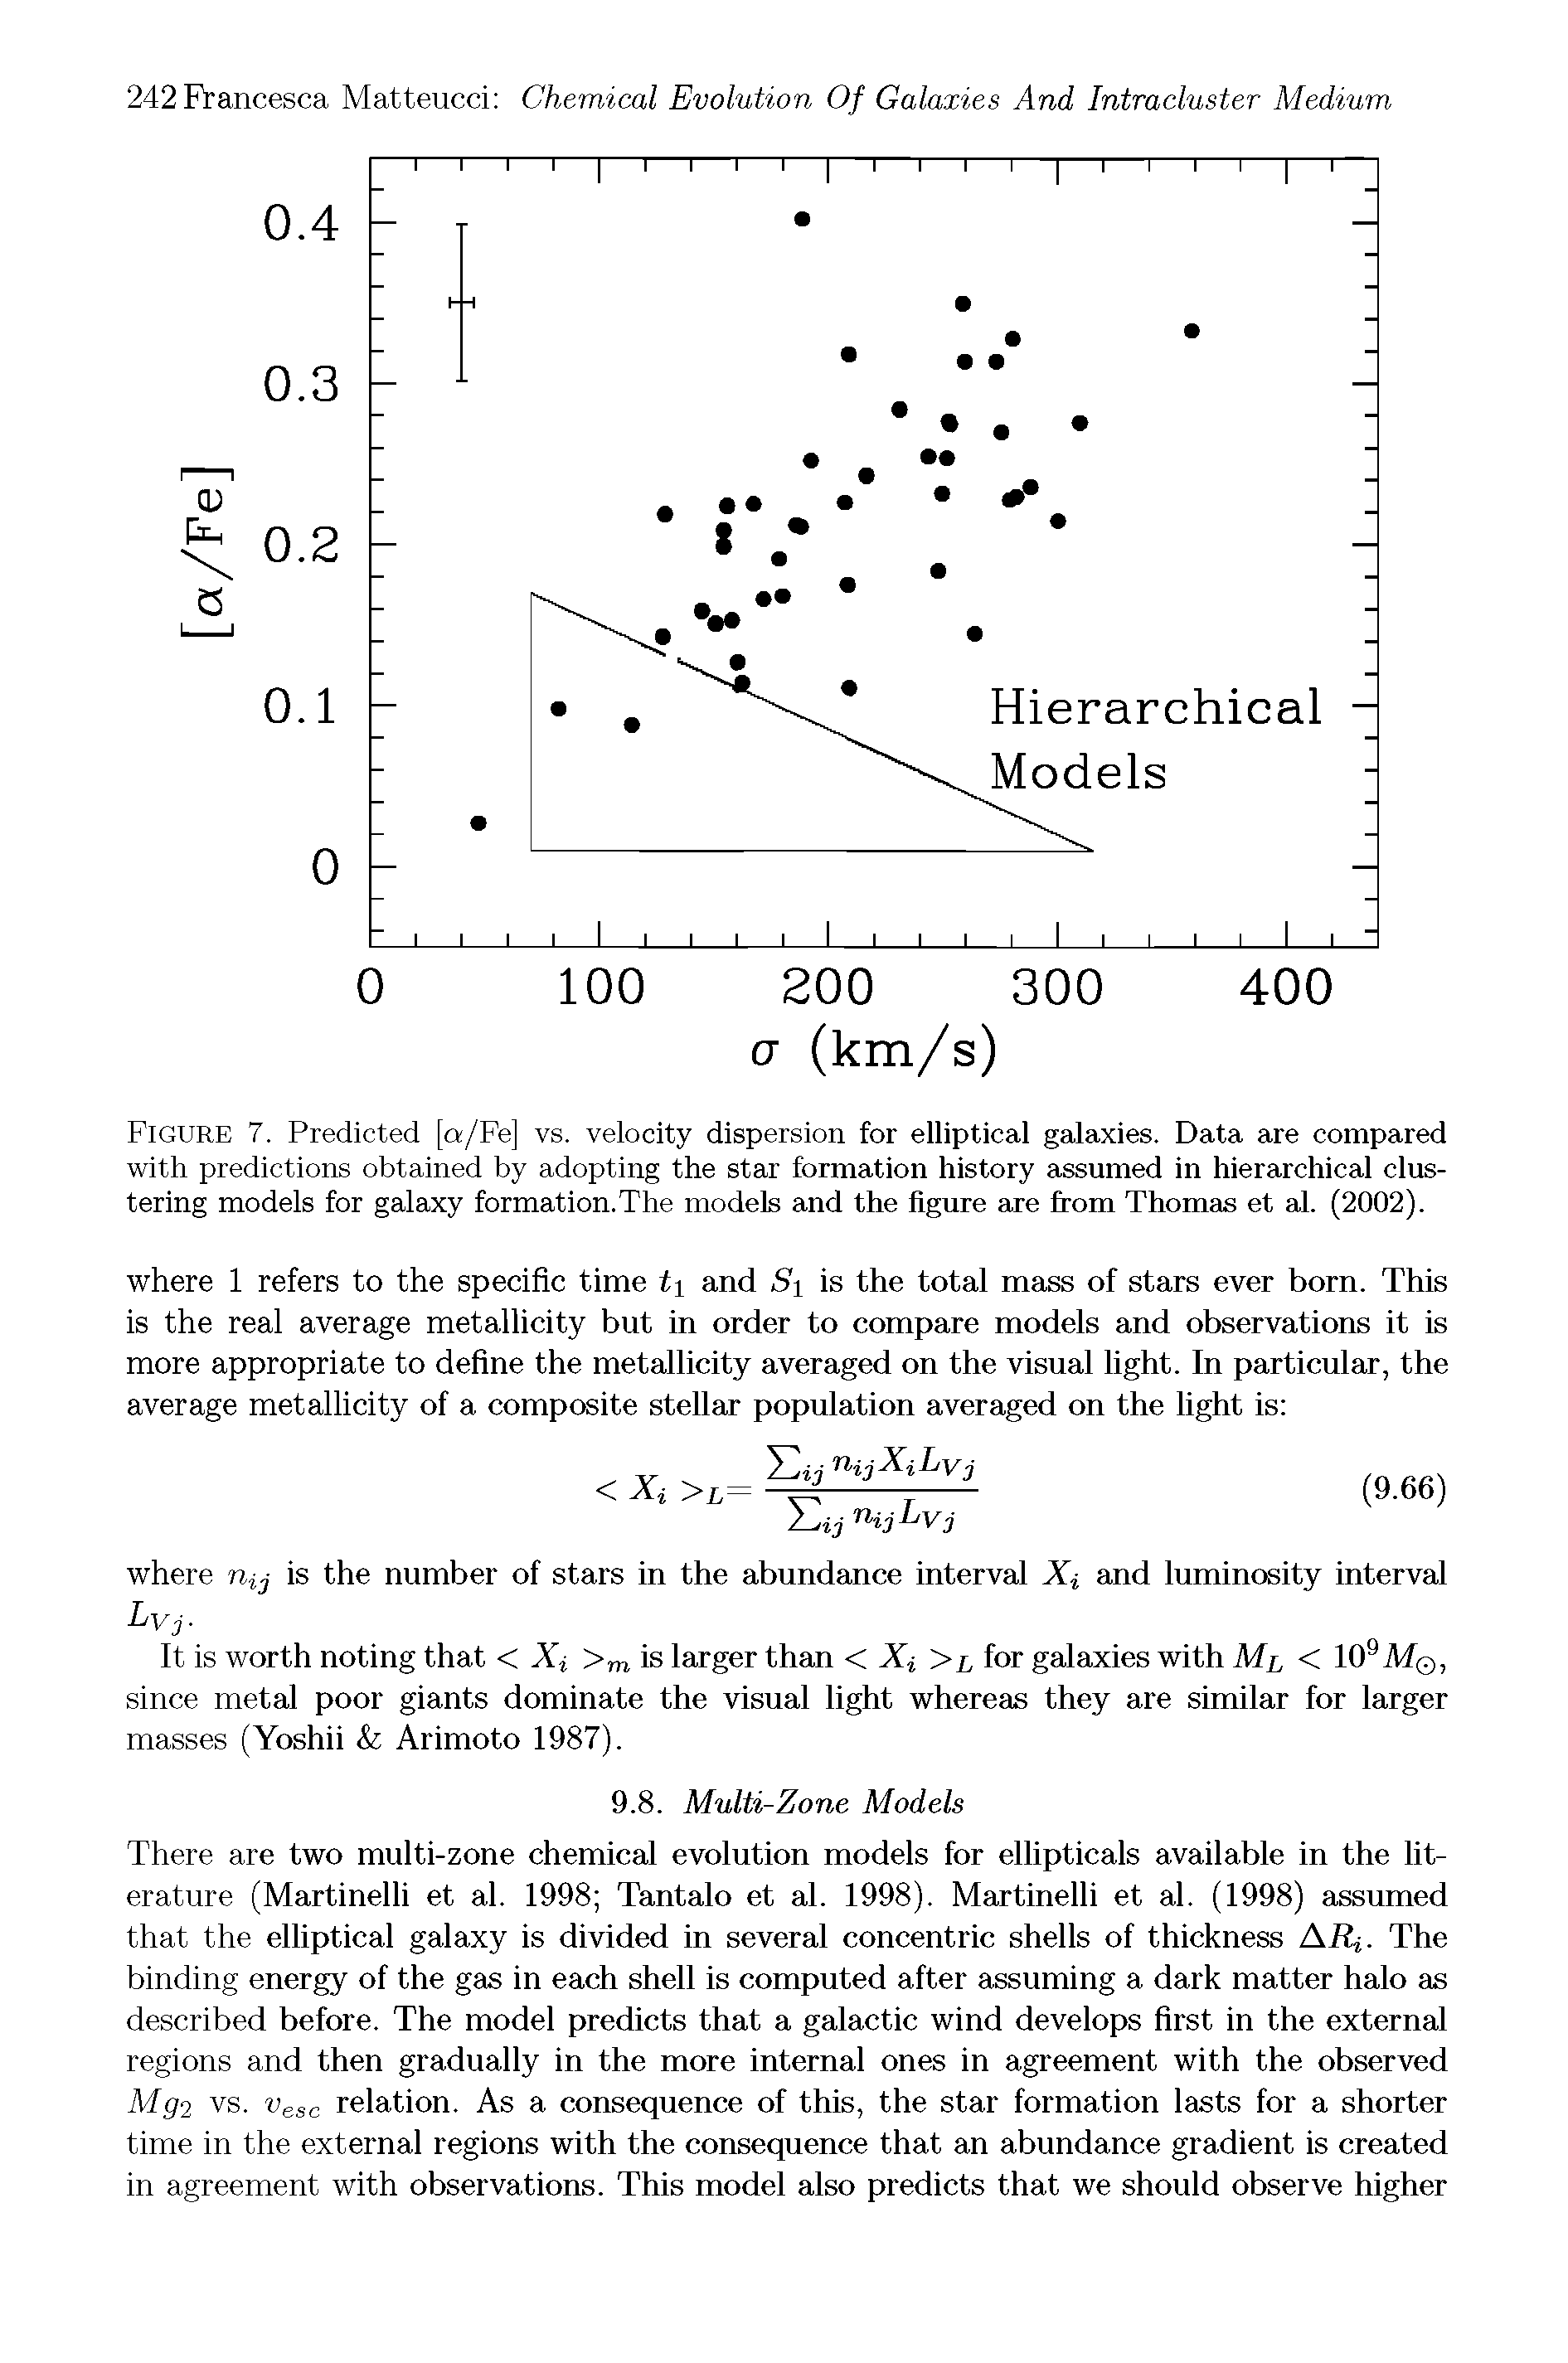 Figure 7. Predicted [a/Fe] vs. velocity dispersion for elliptical galaxies. Data are compared with predictions obtained by adopting the star formation history assumed in hierarchical clustering models for galaxy formation.The models and the figure are from Thomas et al. (2002).